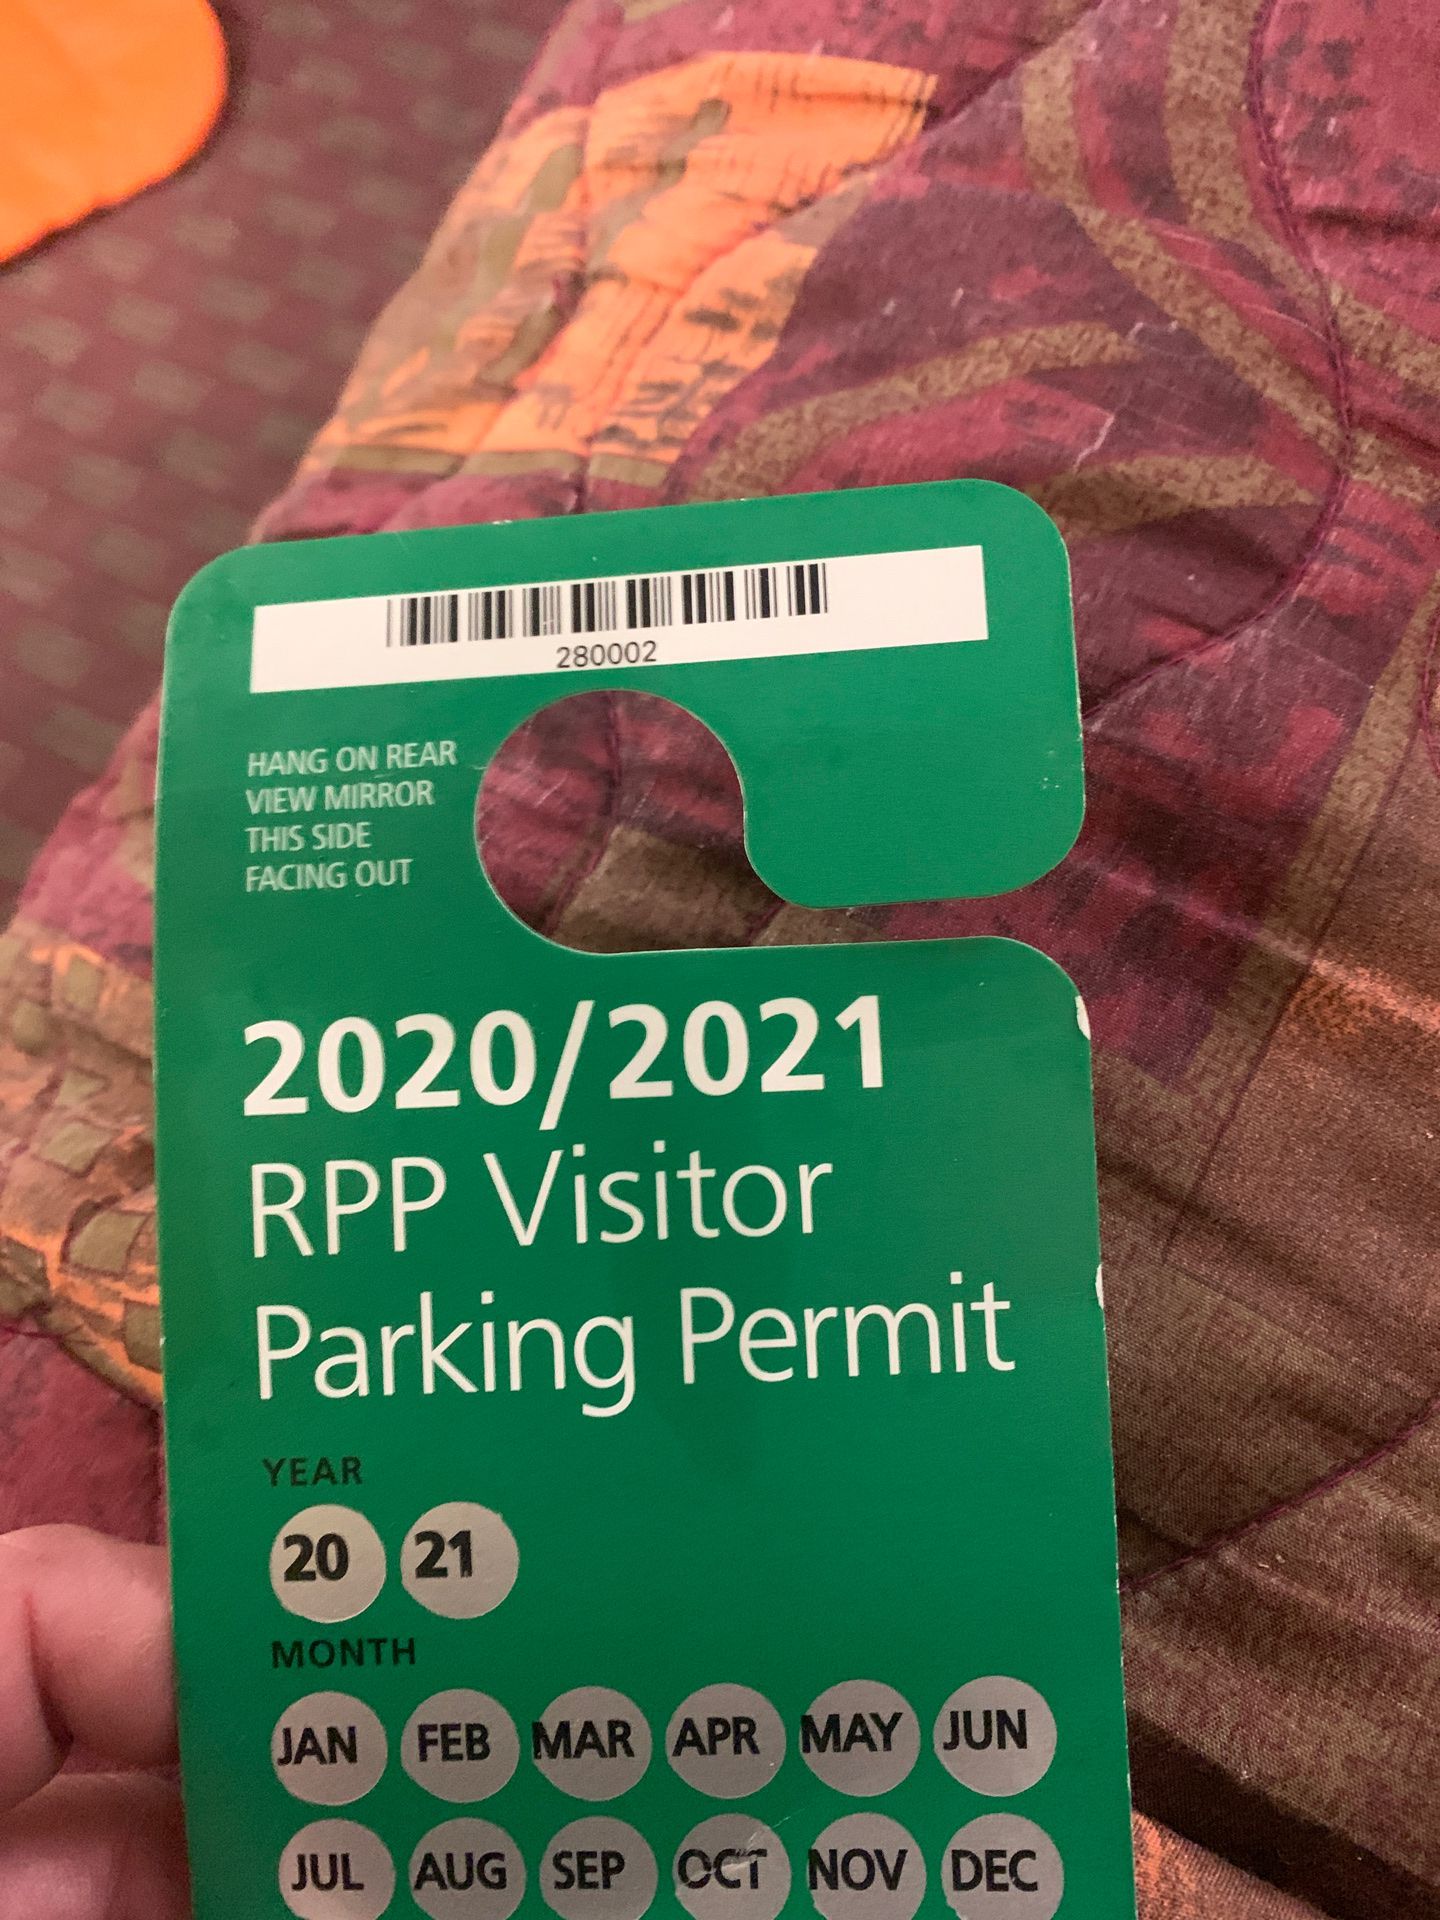 Rpp visitor parking sf pass